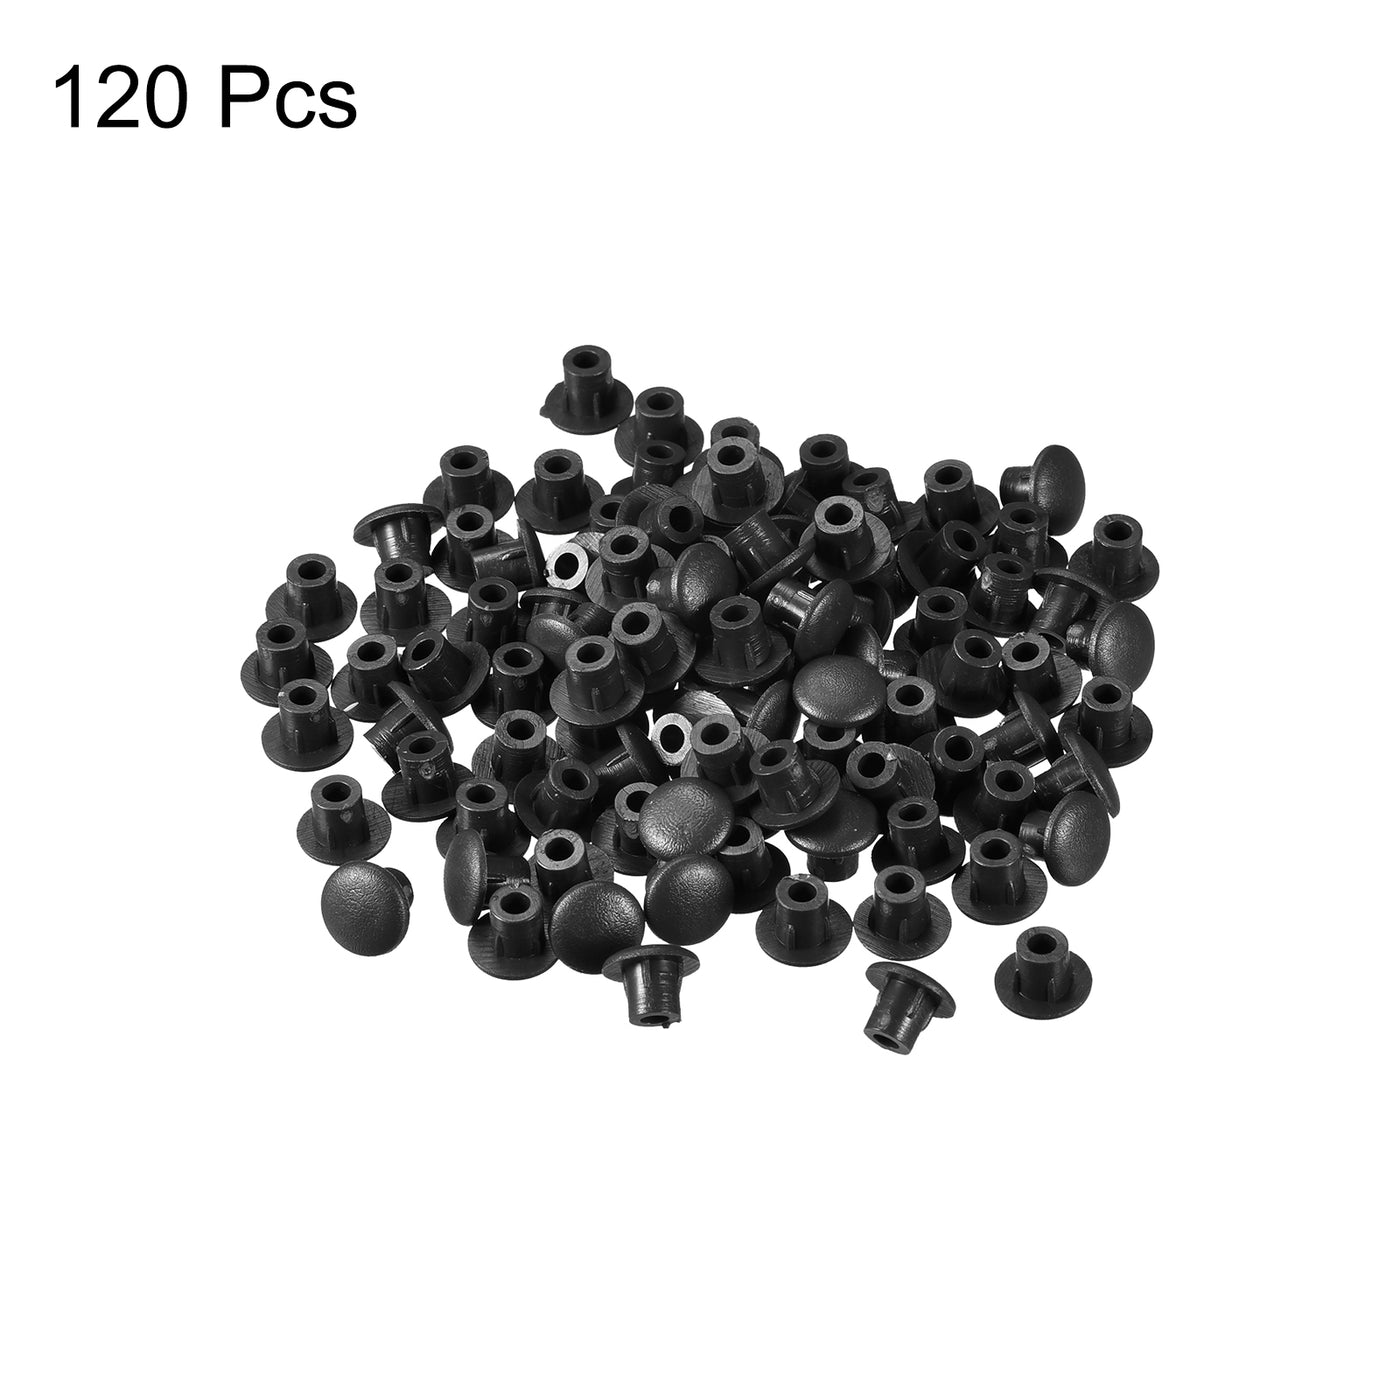 uxcell Uxcell Screw Hole Plugs, 10mm(25/64") Dia PP Snap in Shelf Button Flush Type Caps for Furniture Cabinet Cupboard, Black 120 Pcs